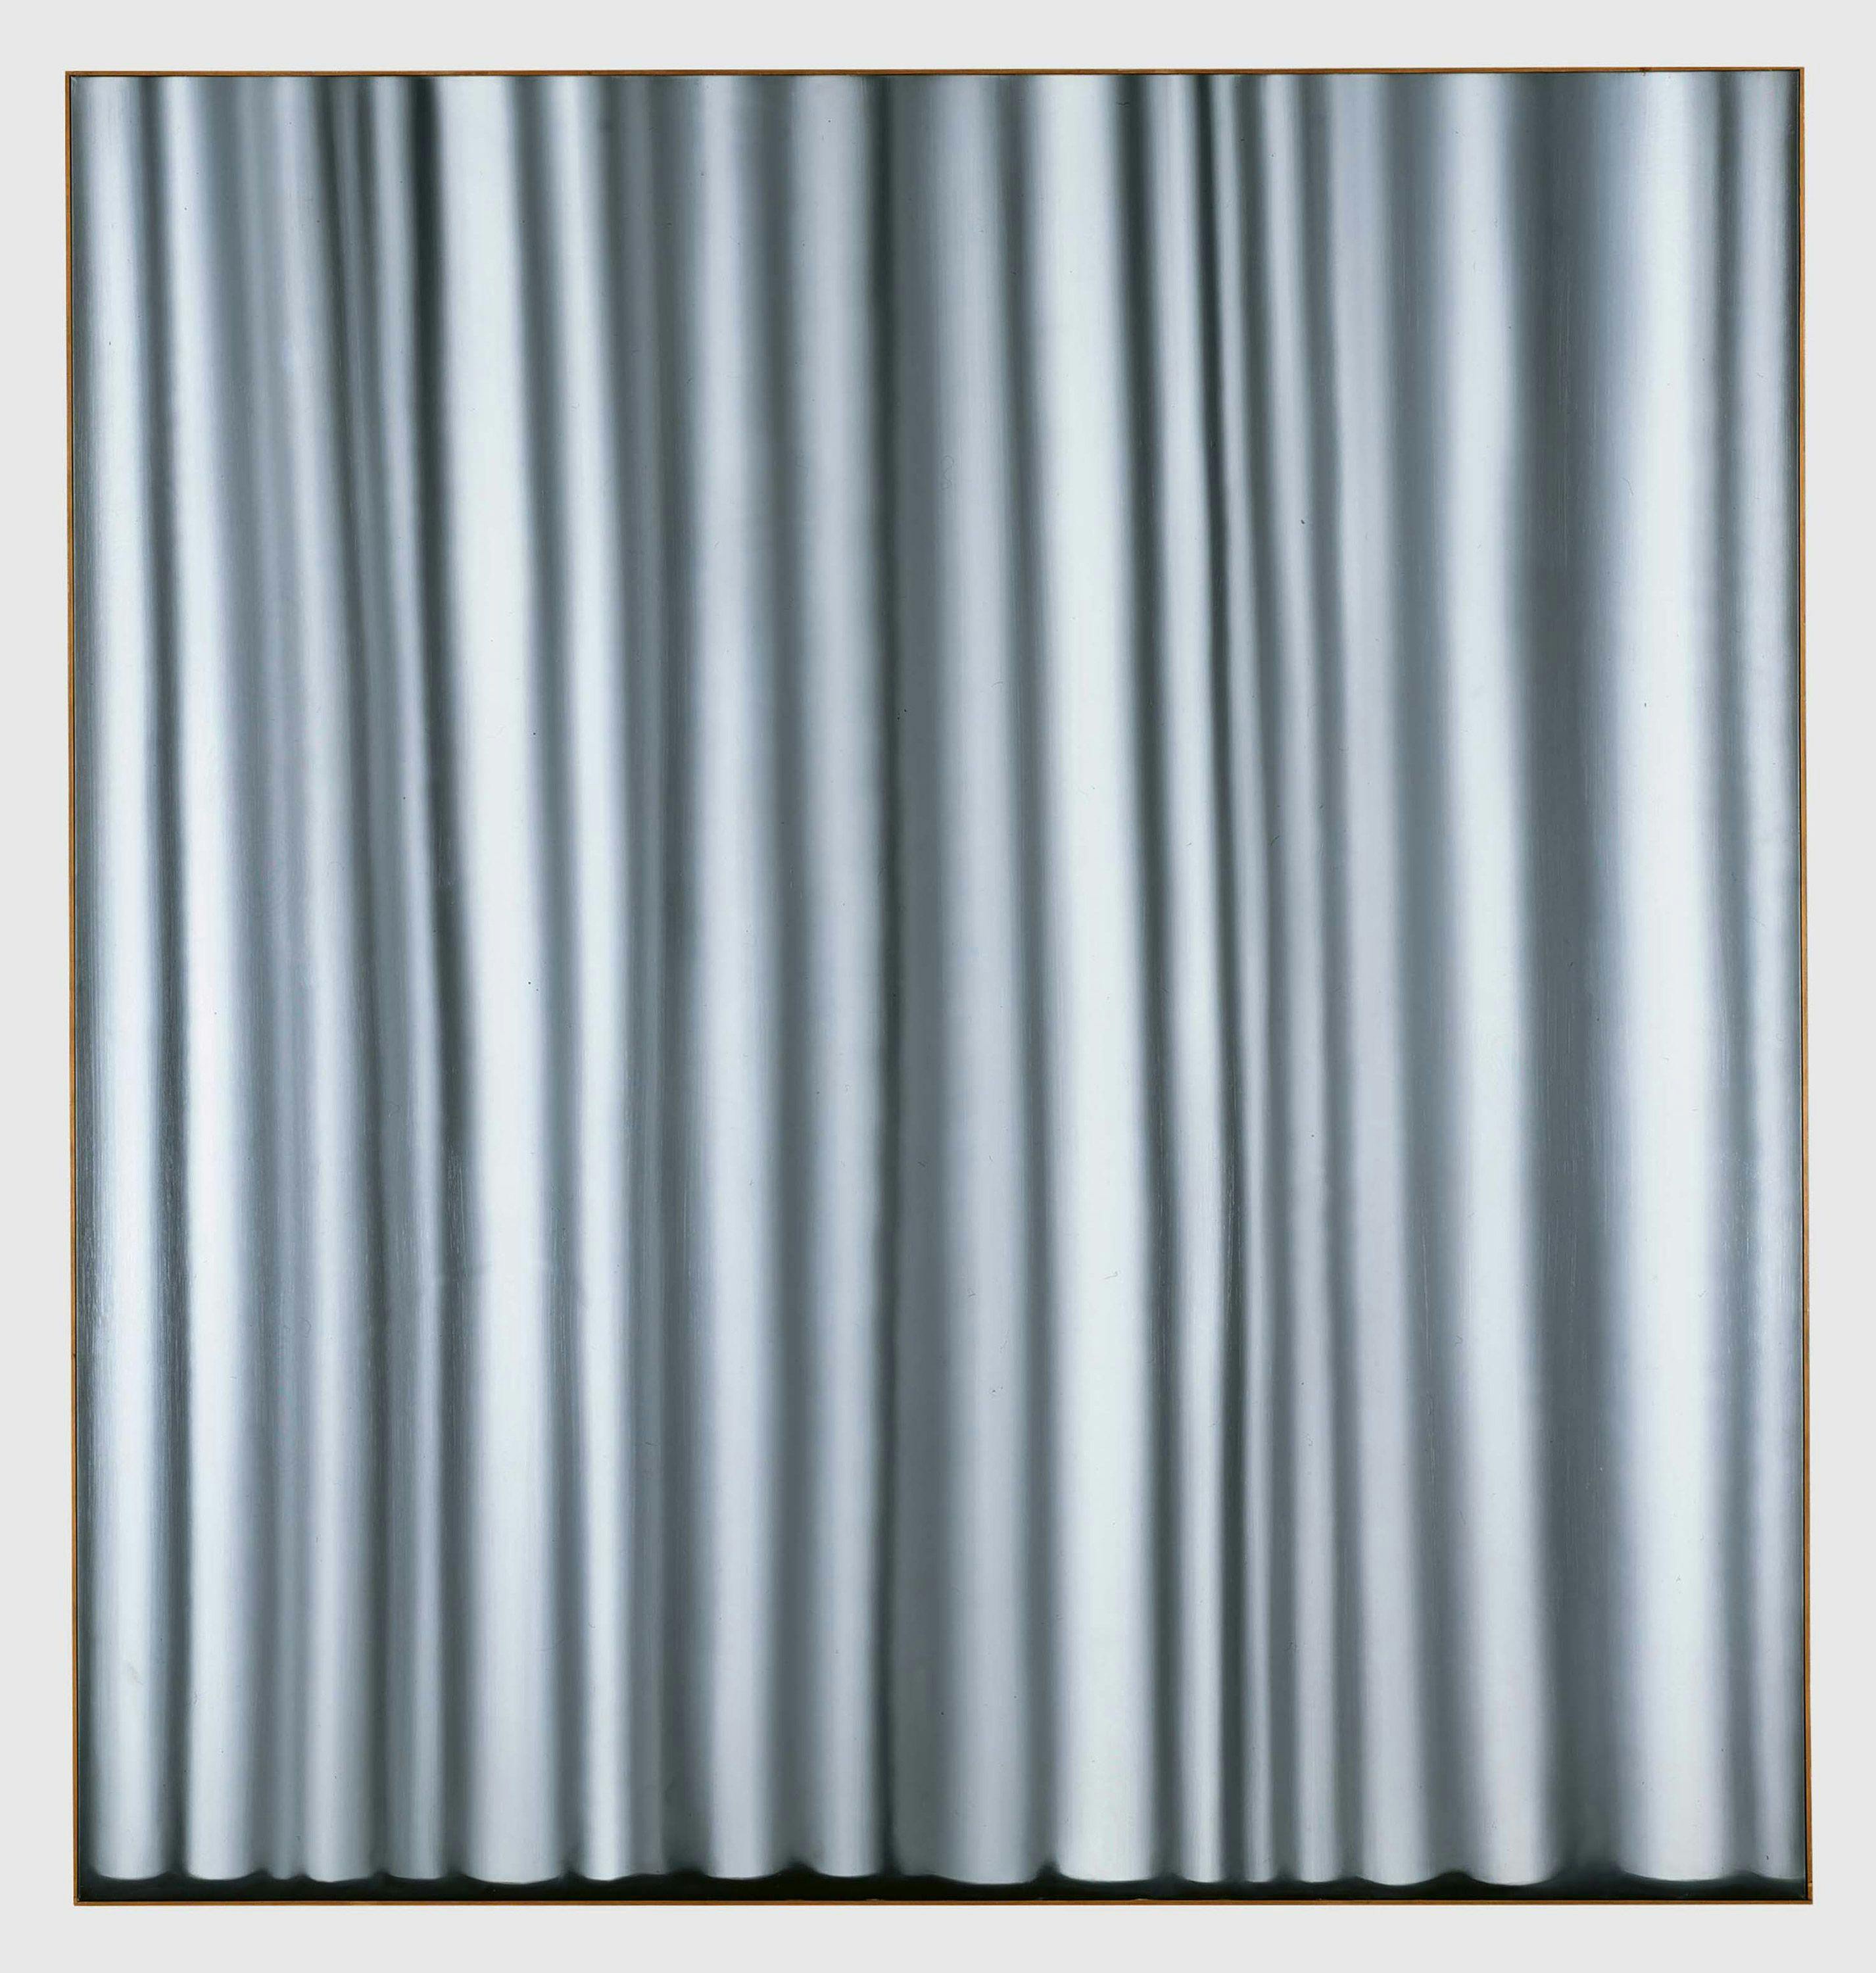 A painting by Gerhard Richter, titled Vorhang III (hell) (Curtain III [Light]), dated 1965.